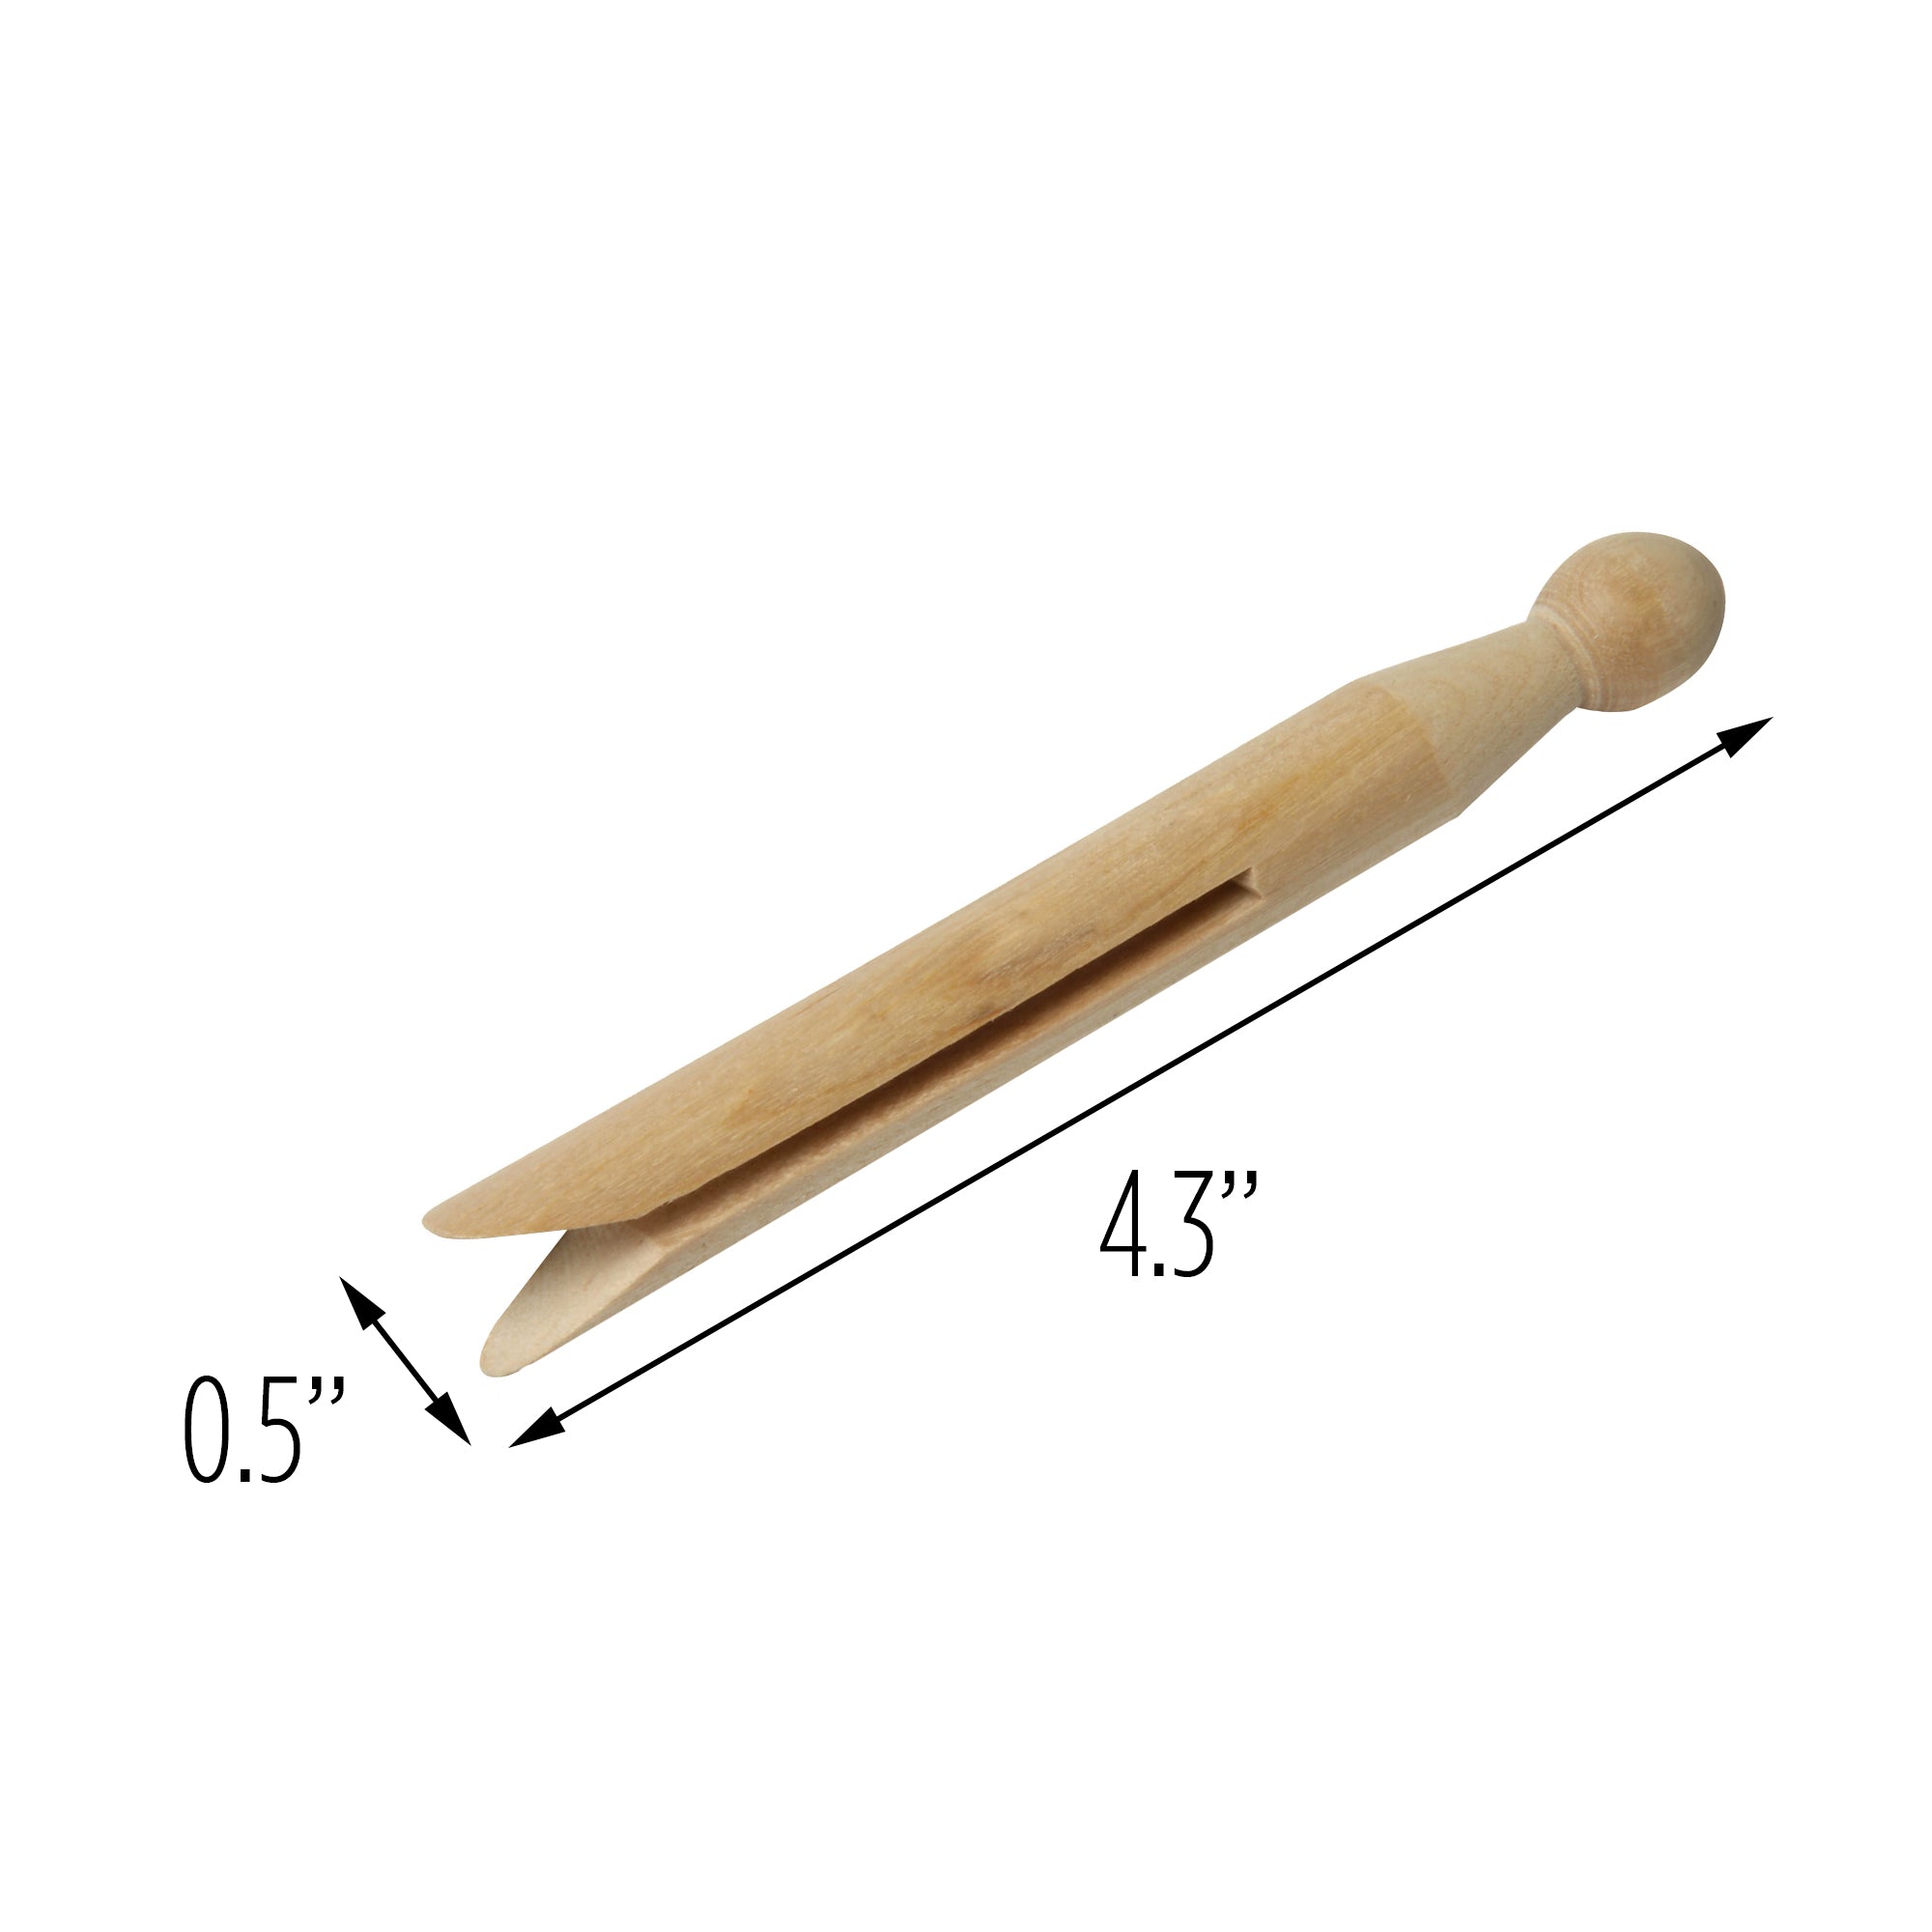 Wholesale Large Wooden Clothespins - Natural Color, 100 Pack, 3.5